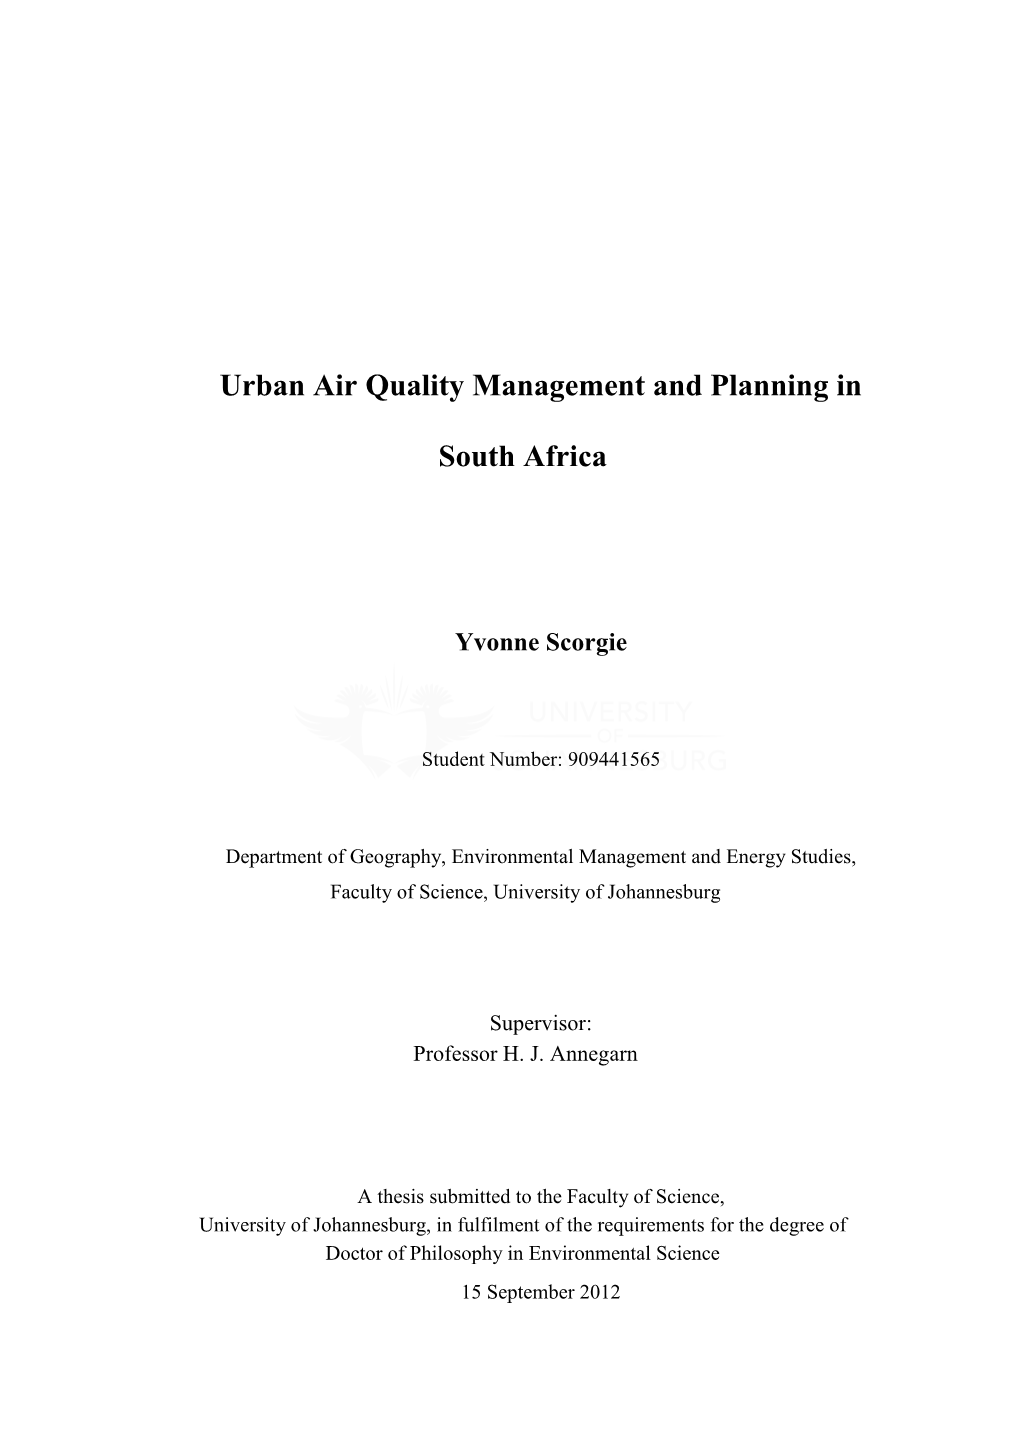 Urban Air Quality Management and Planning in South Africa